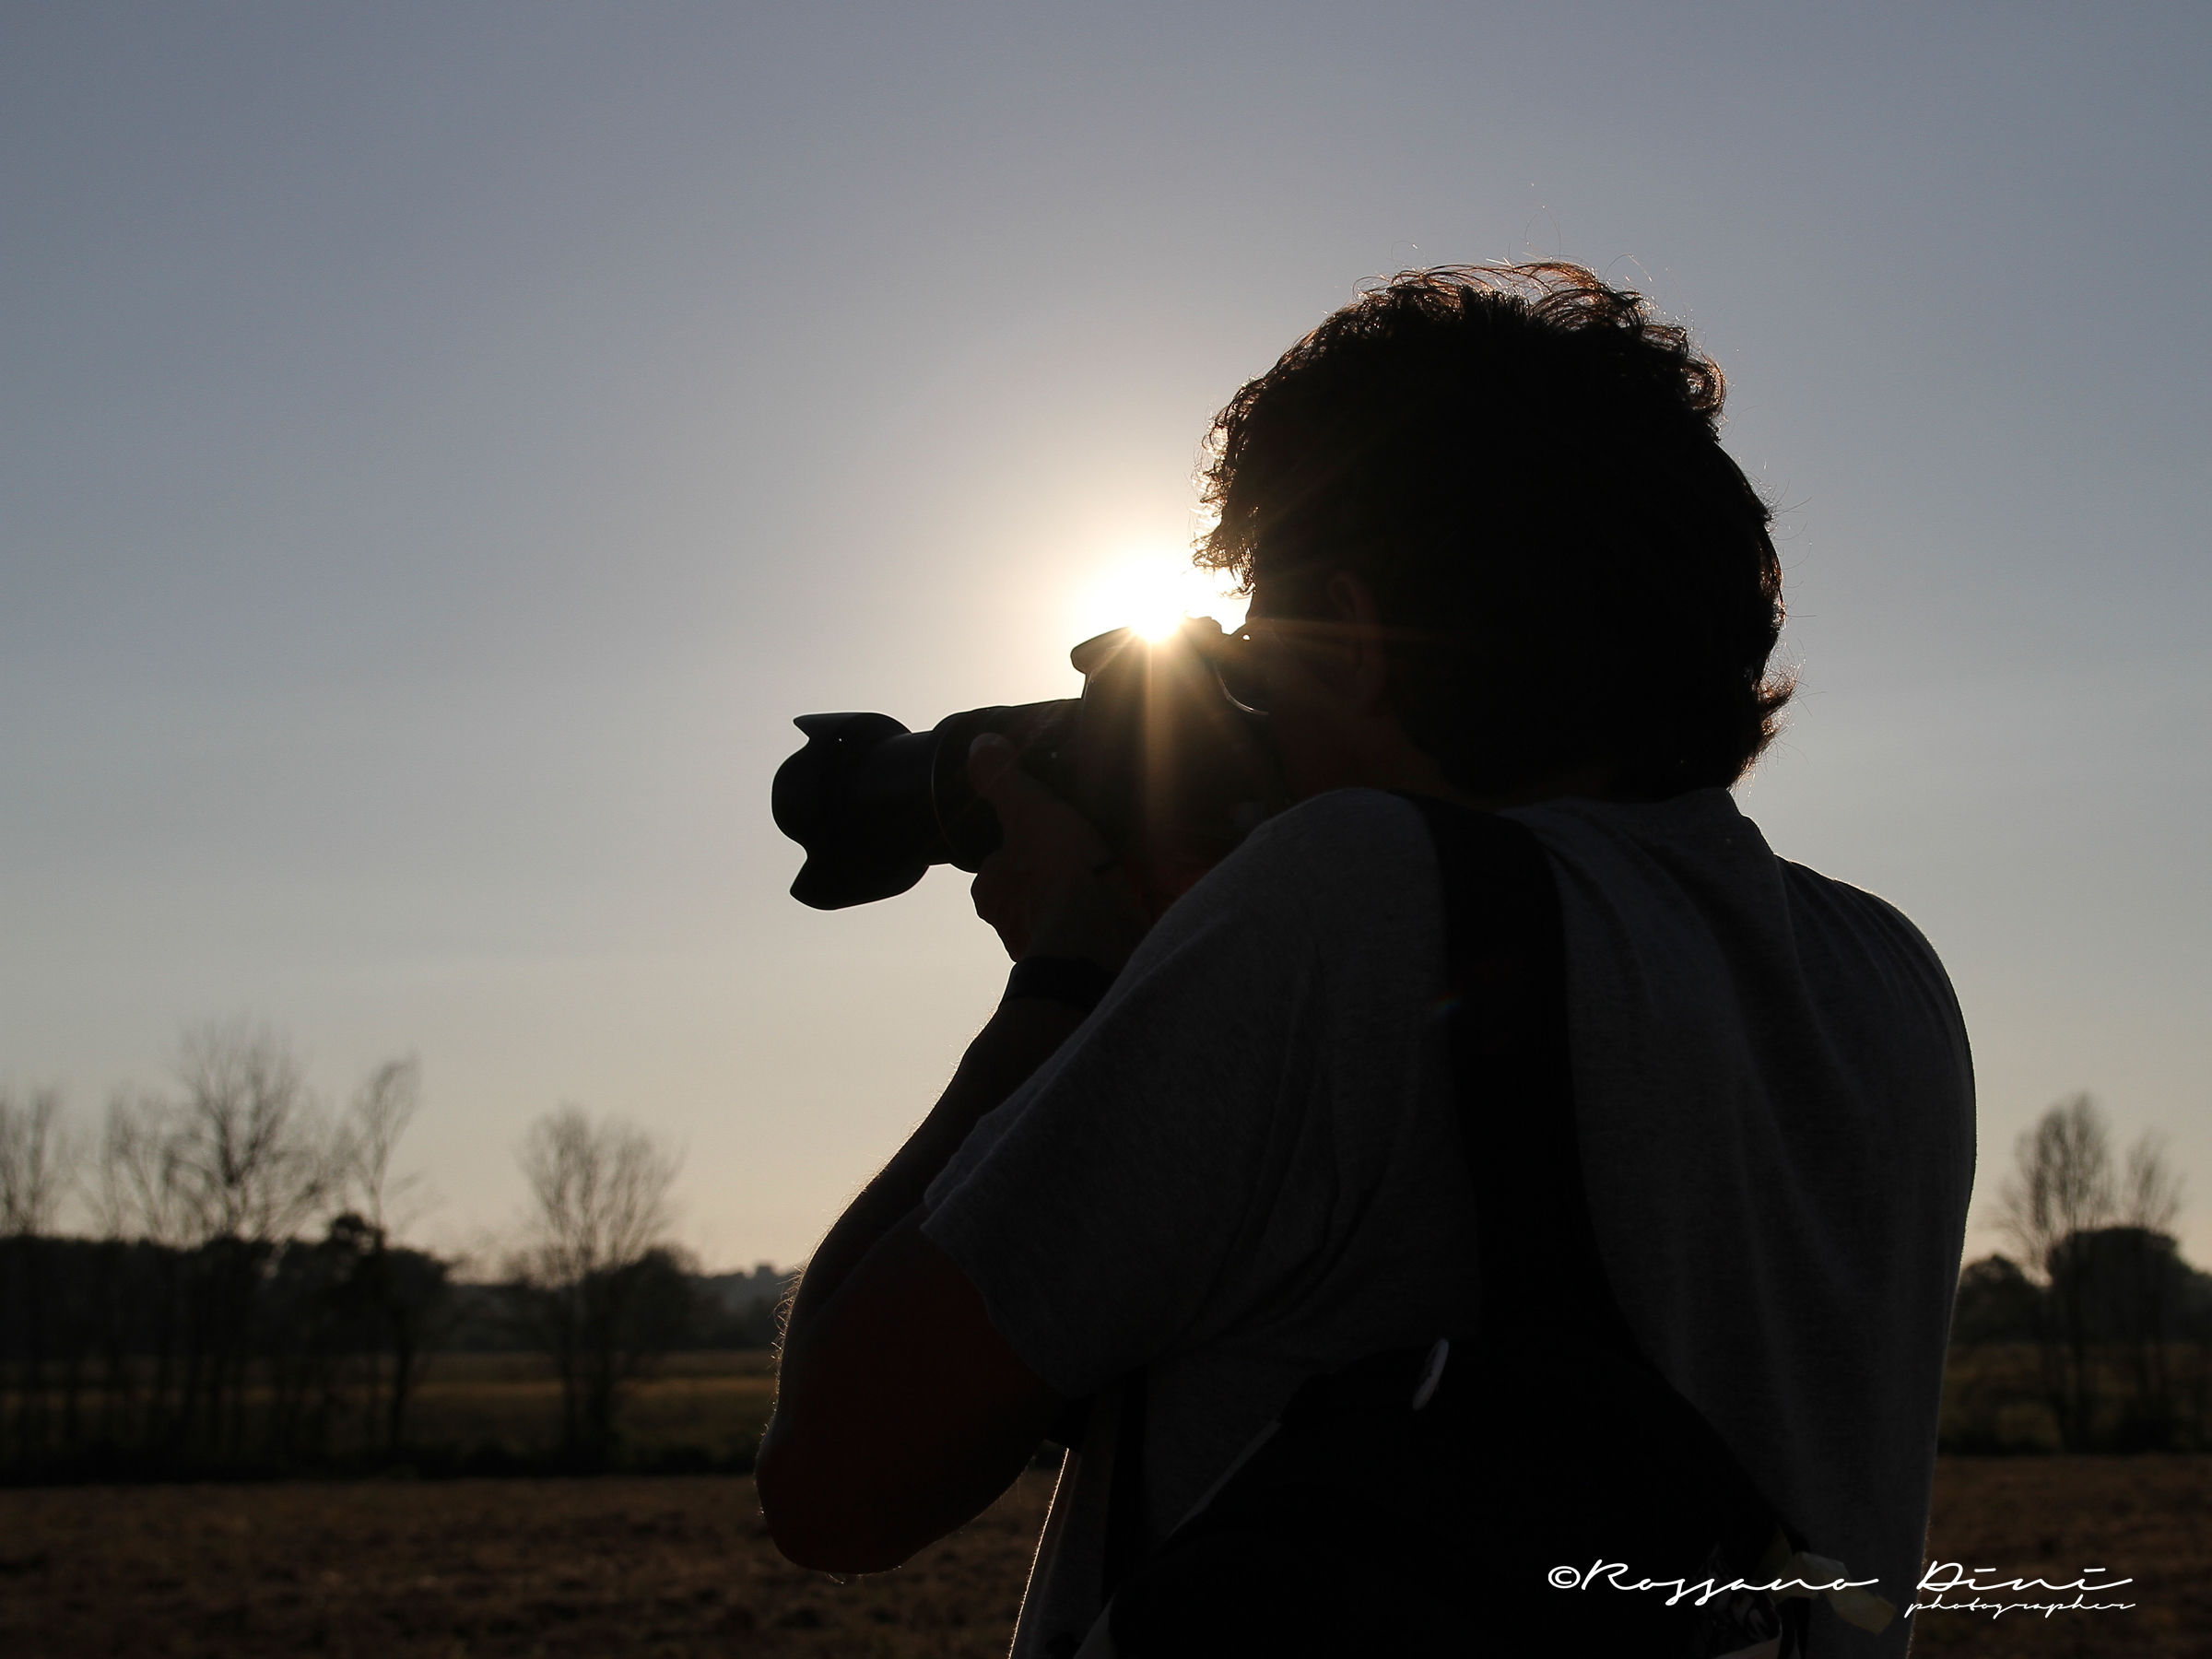 photographing...